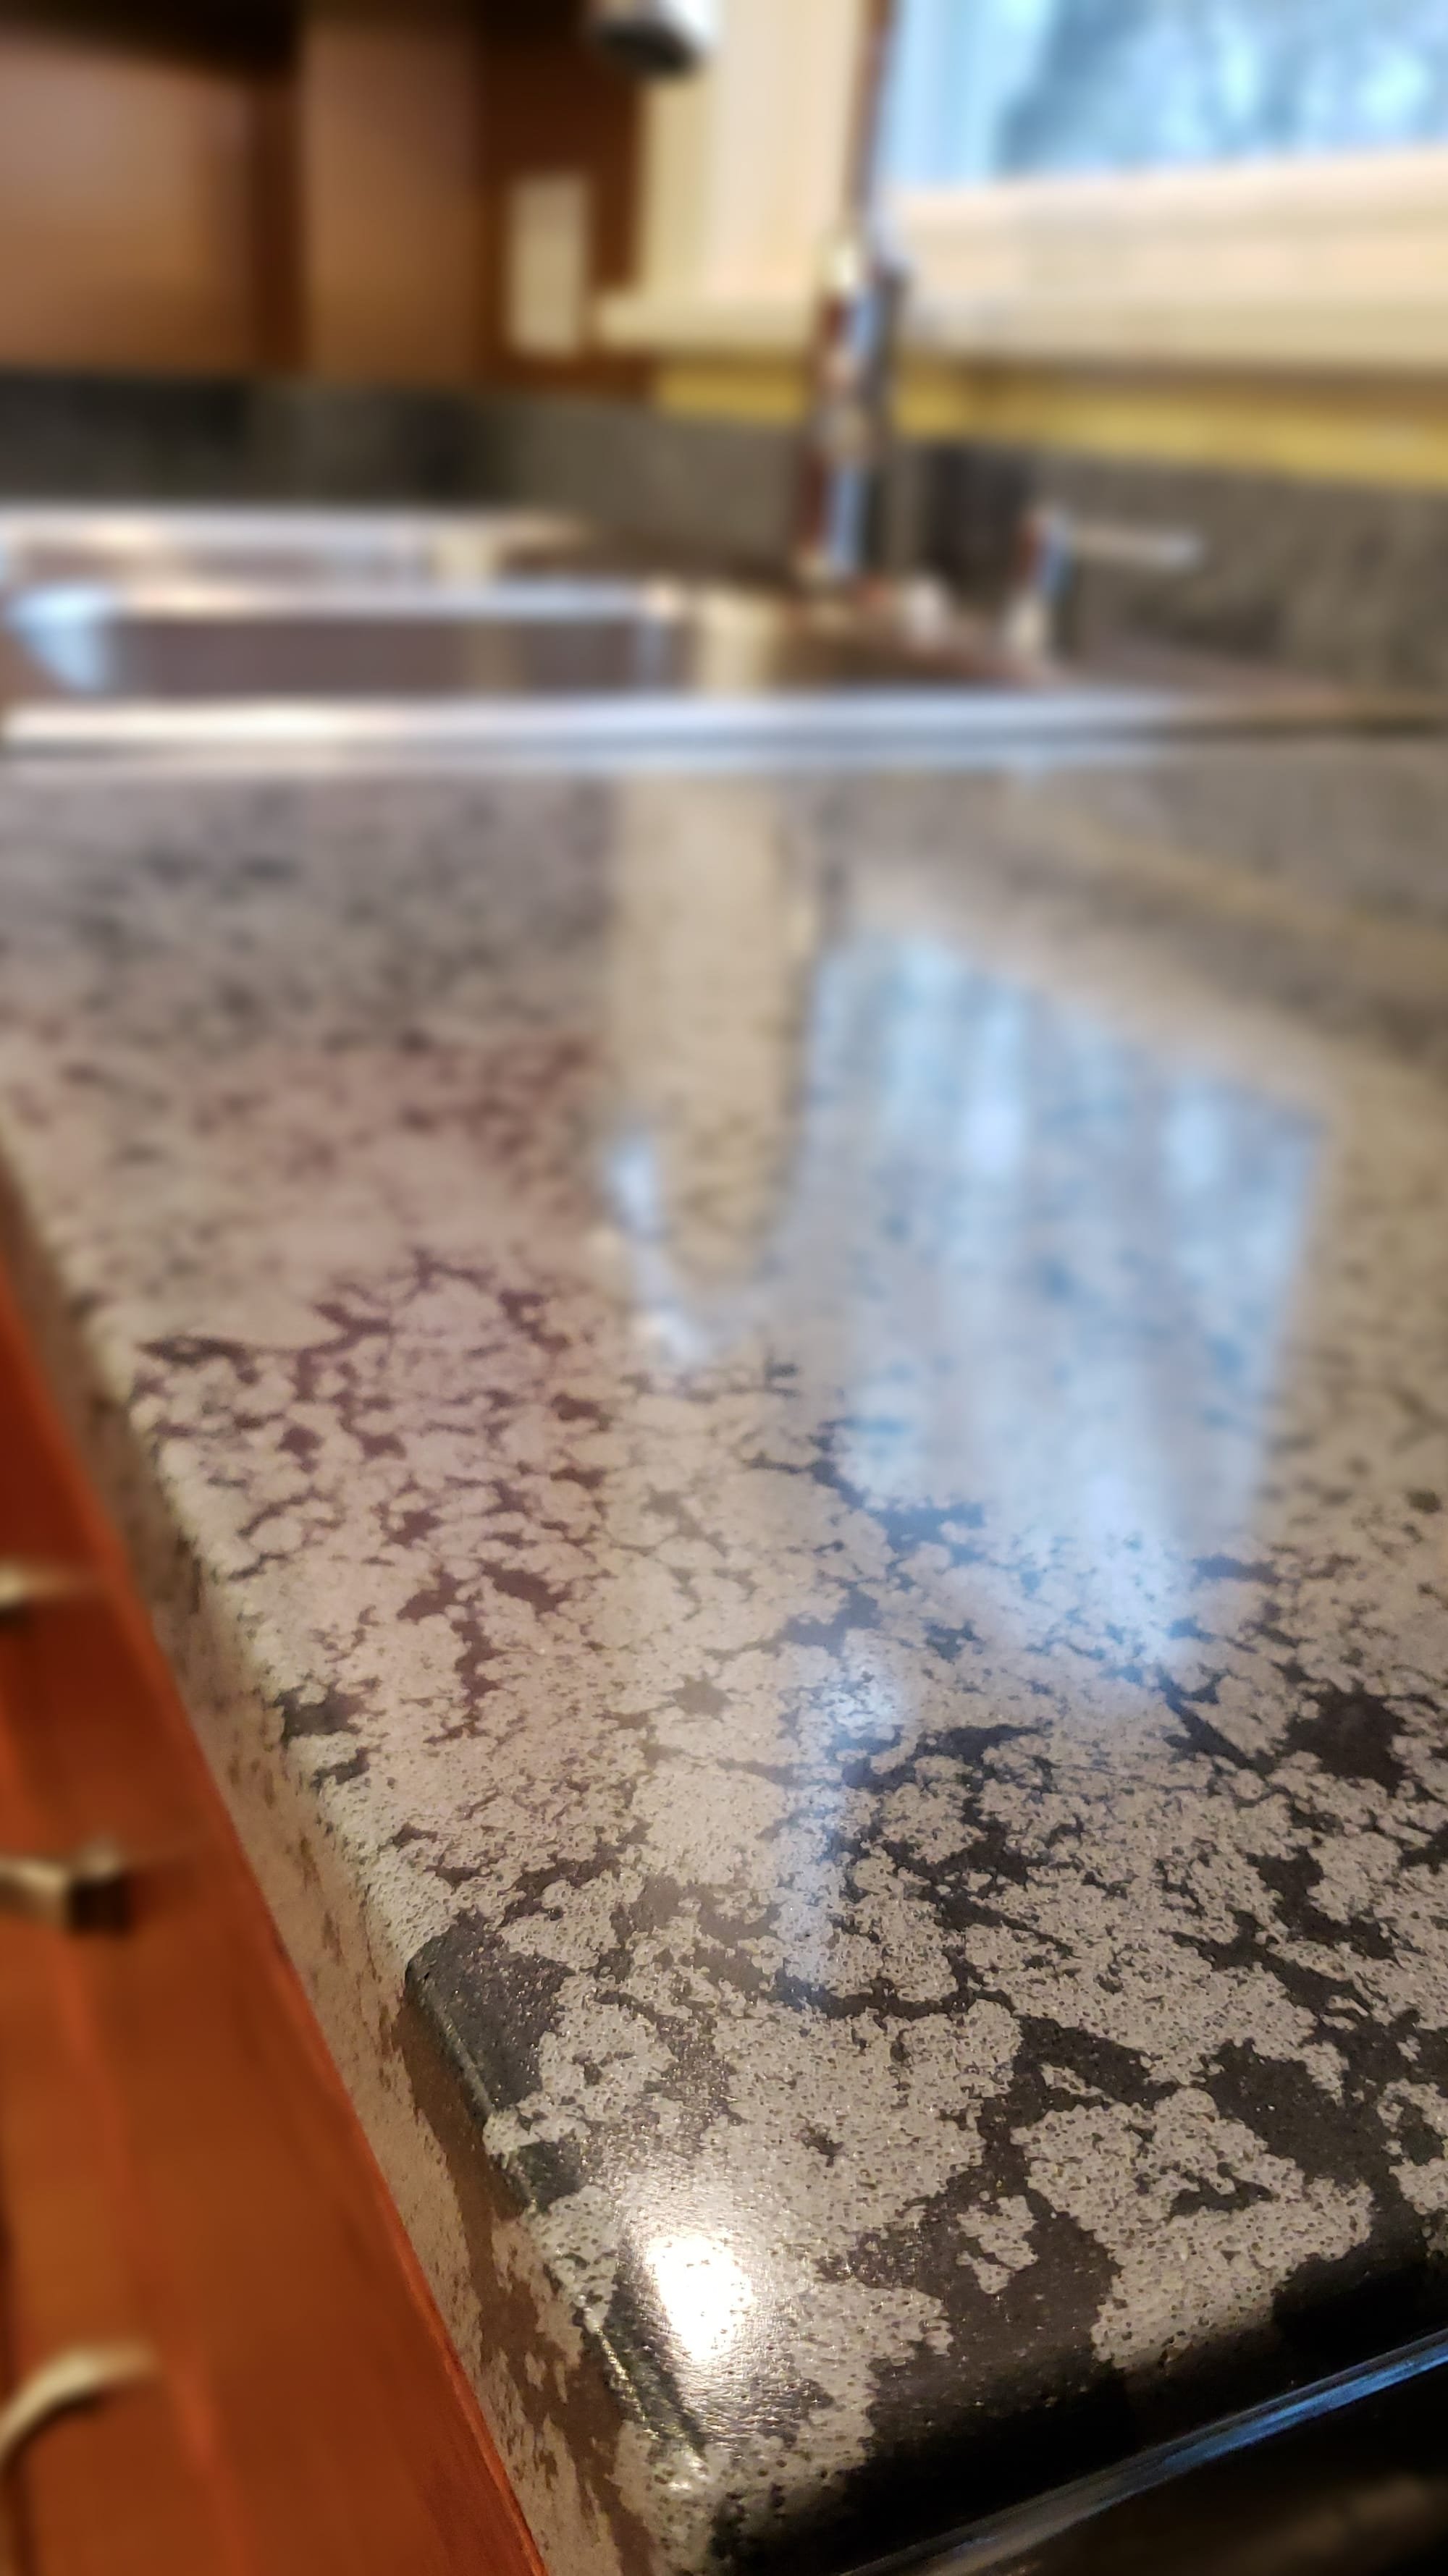 Concrete Countertops Forged Of Wood And Stone